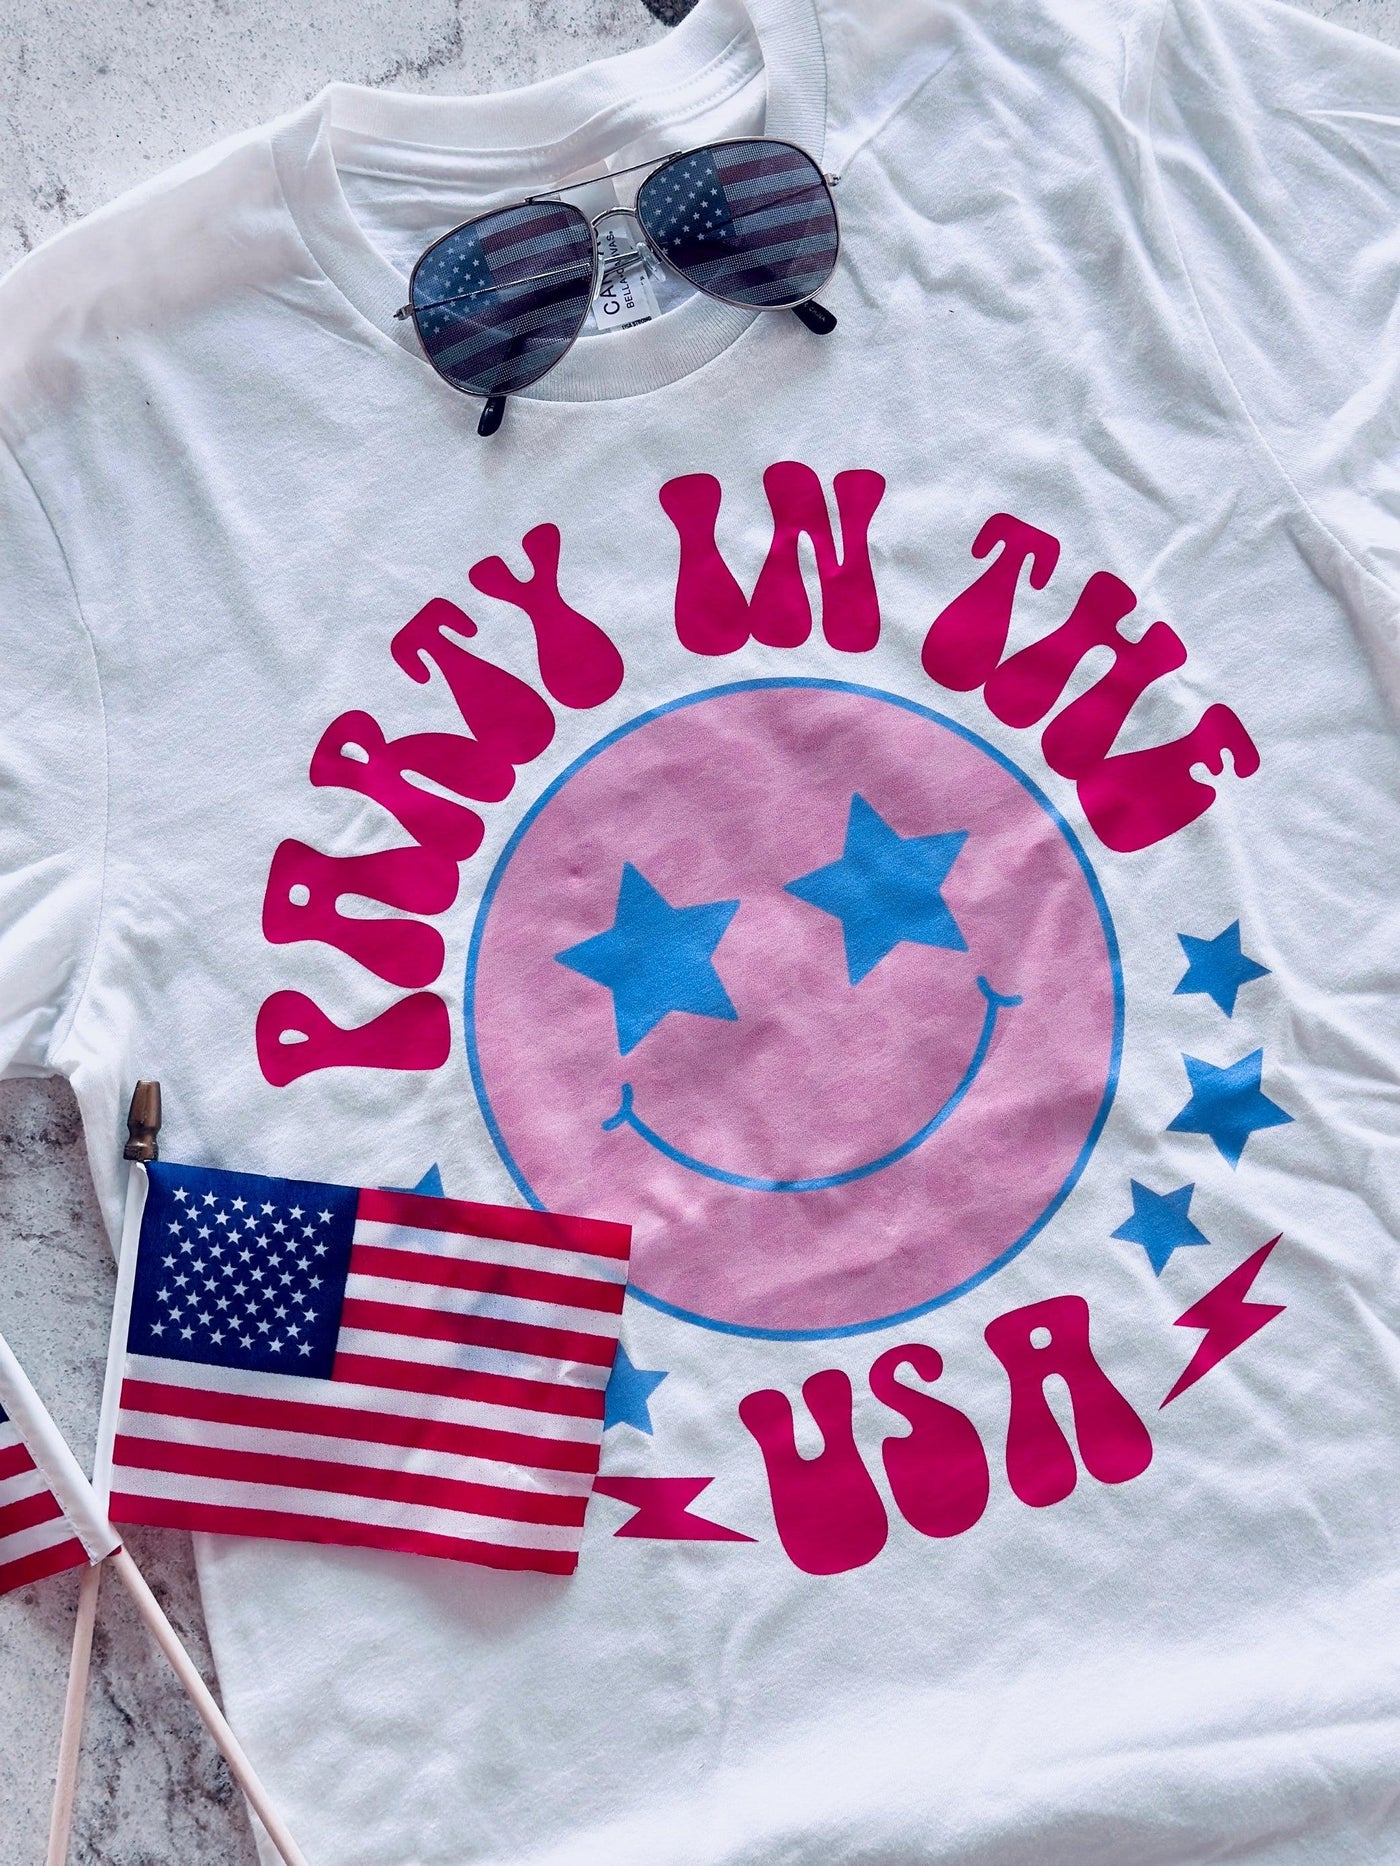 PARTY IN THE USA GRAPHIC TEE , T-SHIRT , it’sNOMB. The Label , 4th of July, 4TH OF JULY TSHIRT, CASUAL T-SHIRT, COLORFUL PATRIOTIC TEE, CREW NECK, CREWNECK, GRAPHIC, GRAPHIC TEE, it's nomb, it's nomb the label, Its None of My Business, ITSNOMB, ITSNOMBTHELABEL, Jessica Nickson, MEMORIAL DAY TSHIRT, party in the usa, Patriotic, T-SHIRT, TEE, TEES, TSHIRT, TSHIRTS , It's NOMB , itsnomb.com